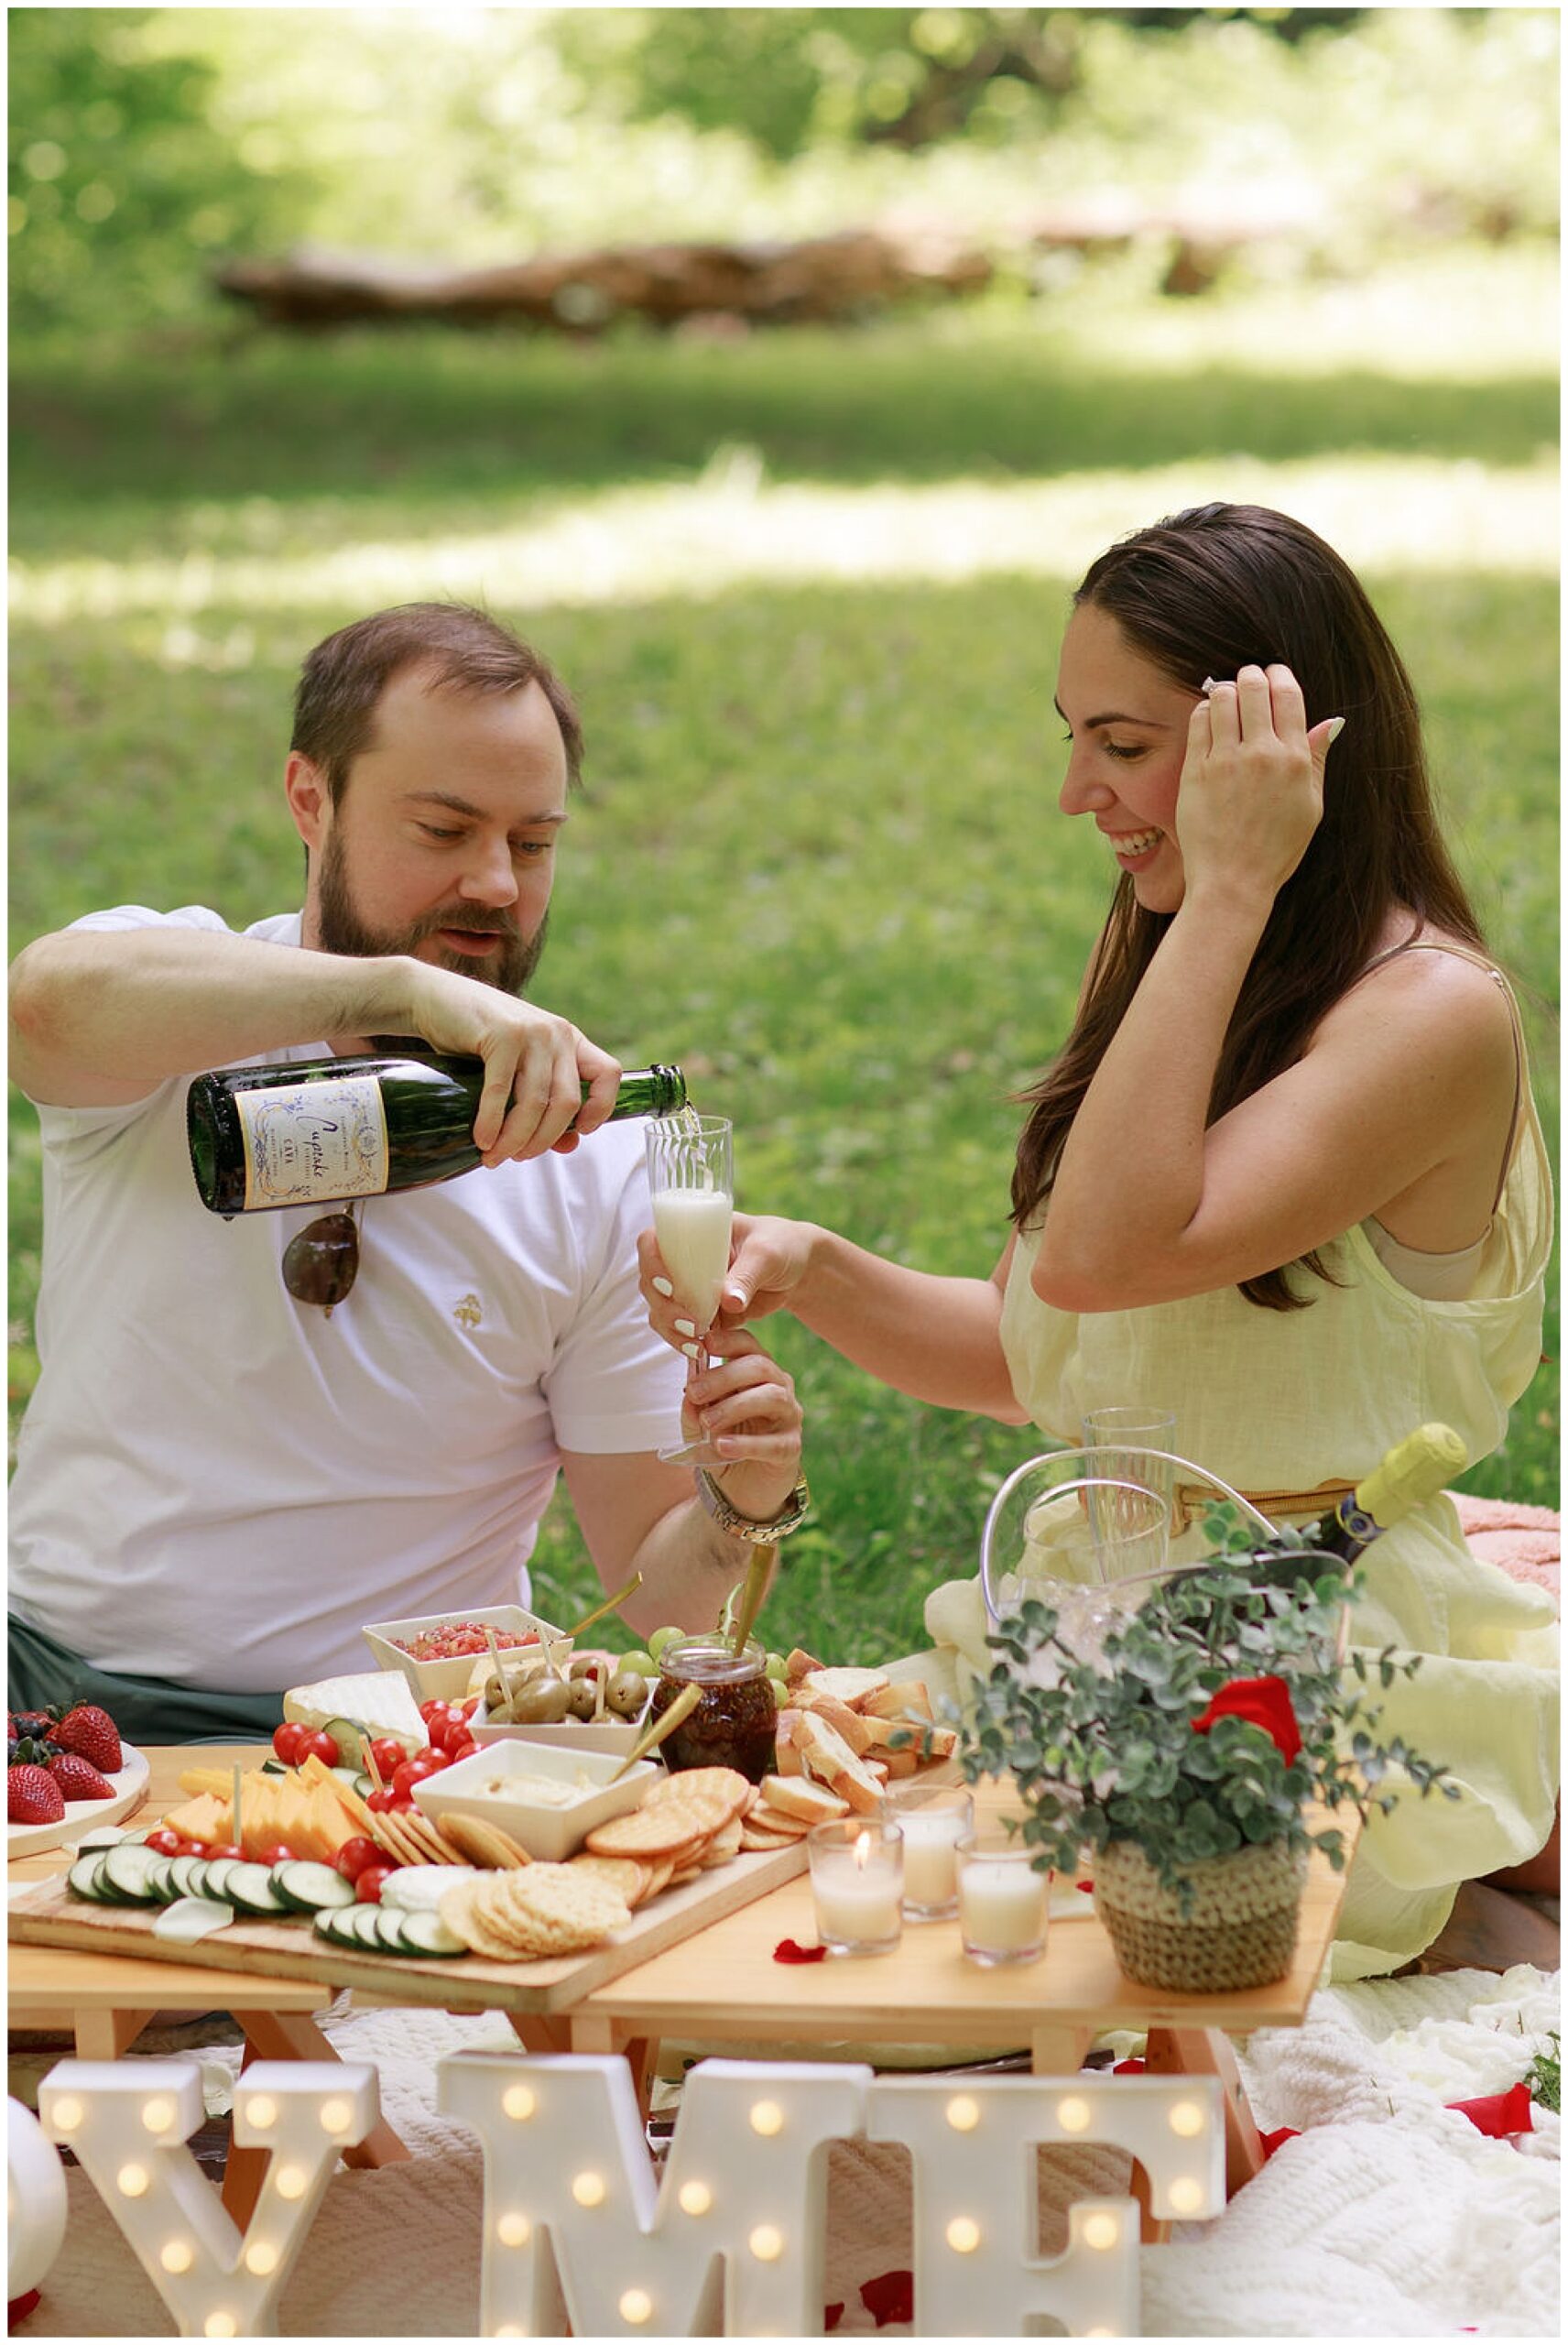 A newly engaged couple enjoys a charcuterie platter in a park with champagne dc engagement photographer